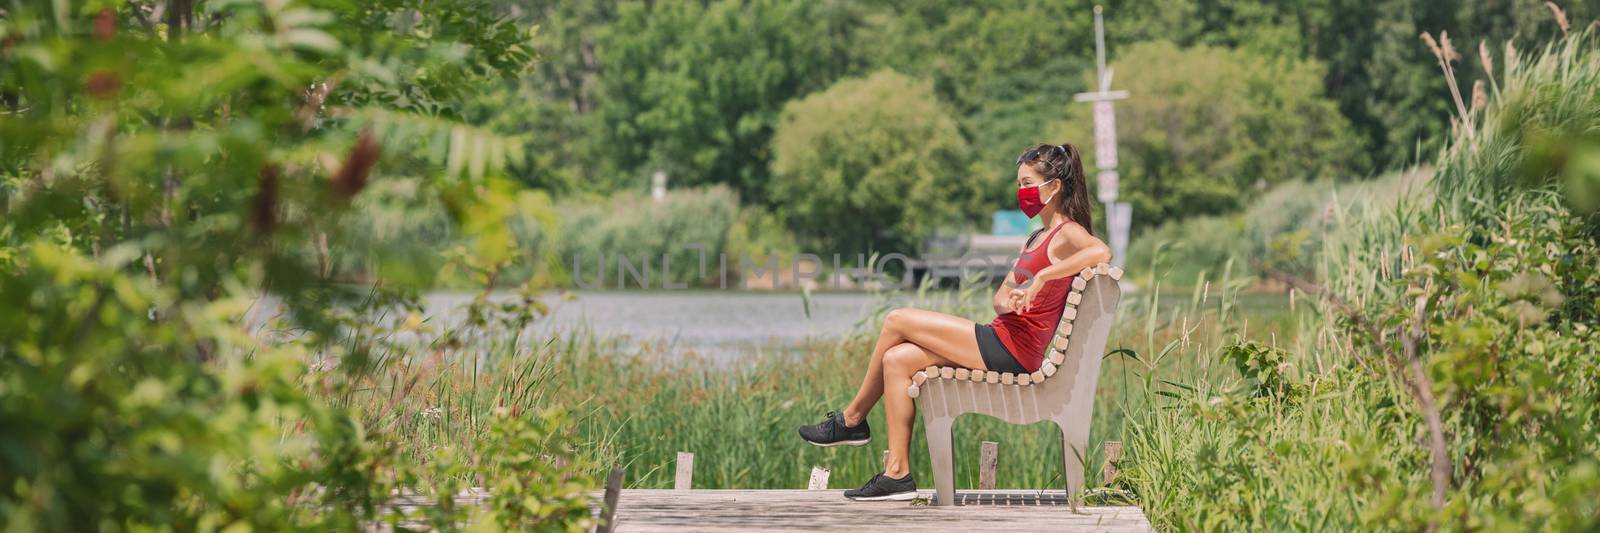 Mask wearing woman sitting relaxing on bench outside in summer nature park for coronavirus prevention. Protectve face covering COVID-19 lifestyle. Banner panoramic by Maridav